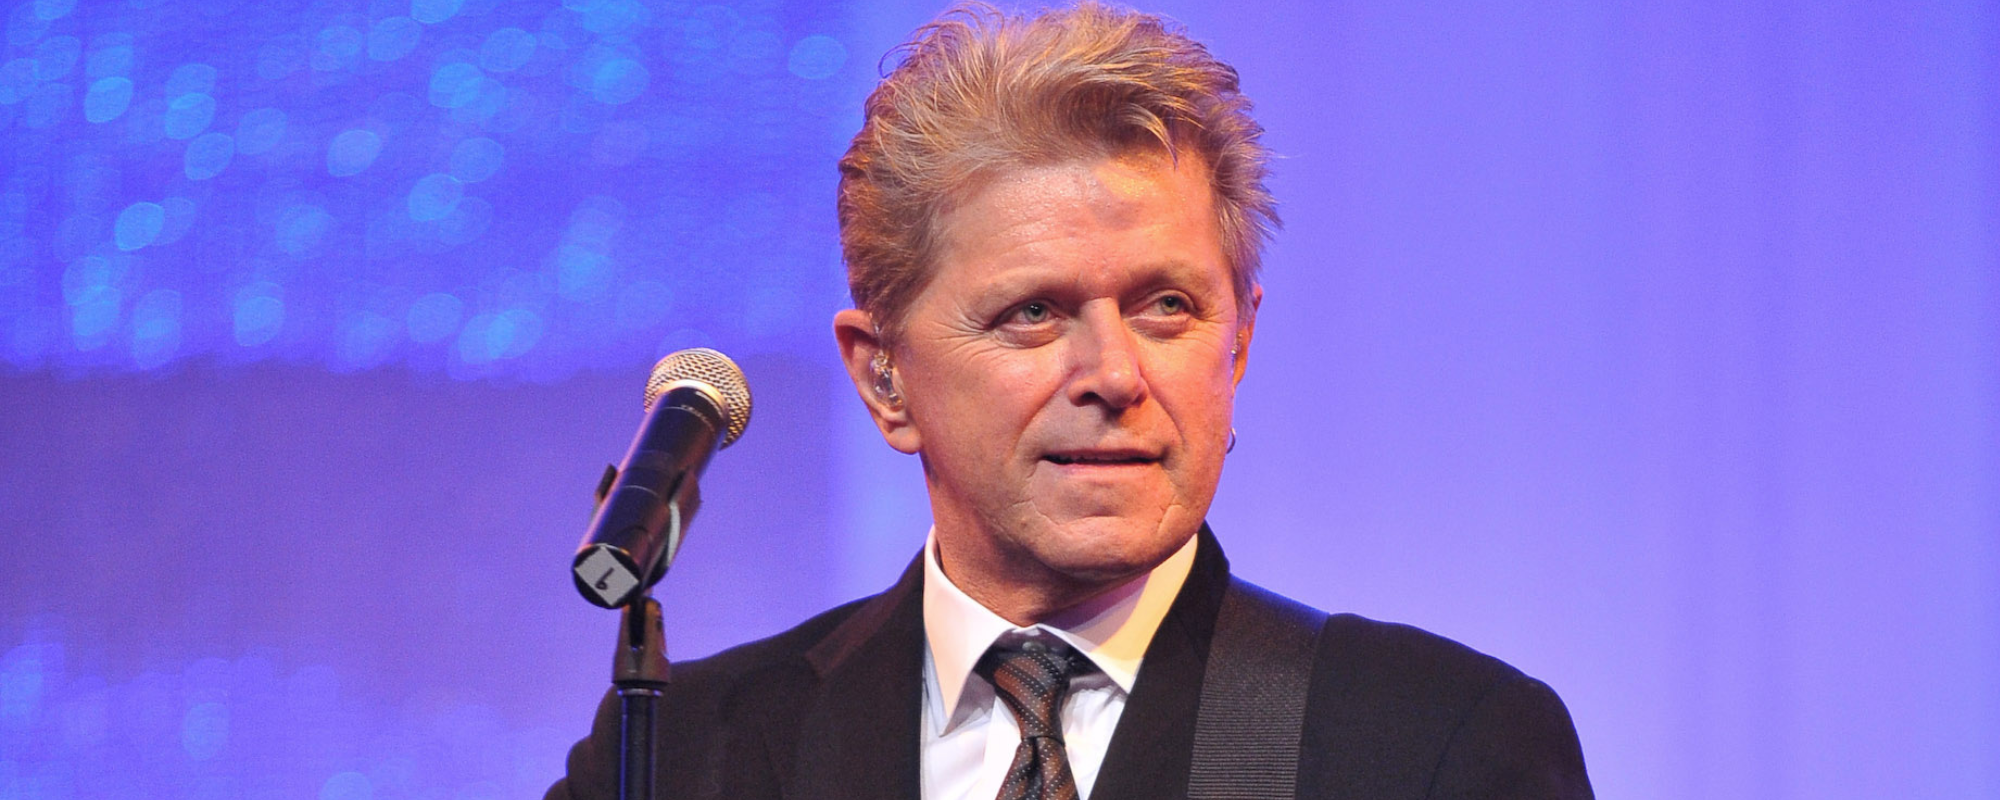 4 Songs You Didn’t Know Peter Cetera Wrote for Chicago